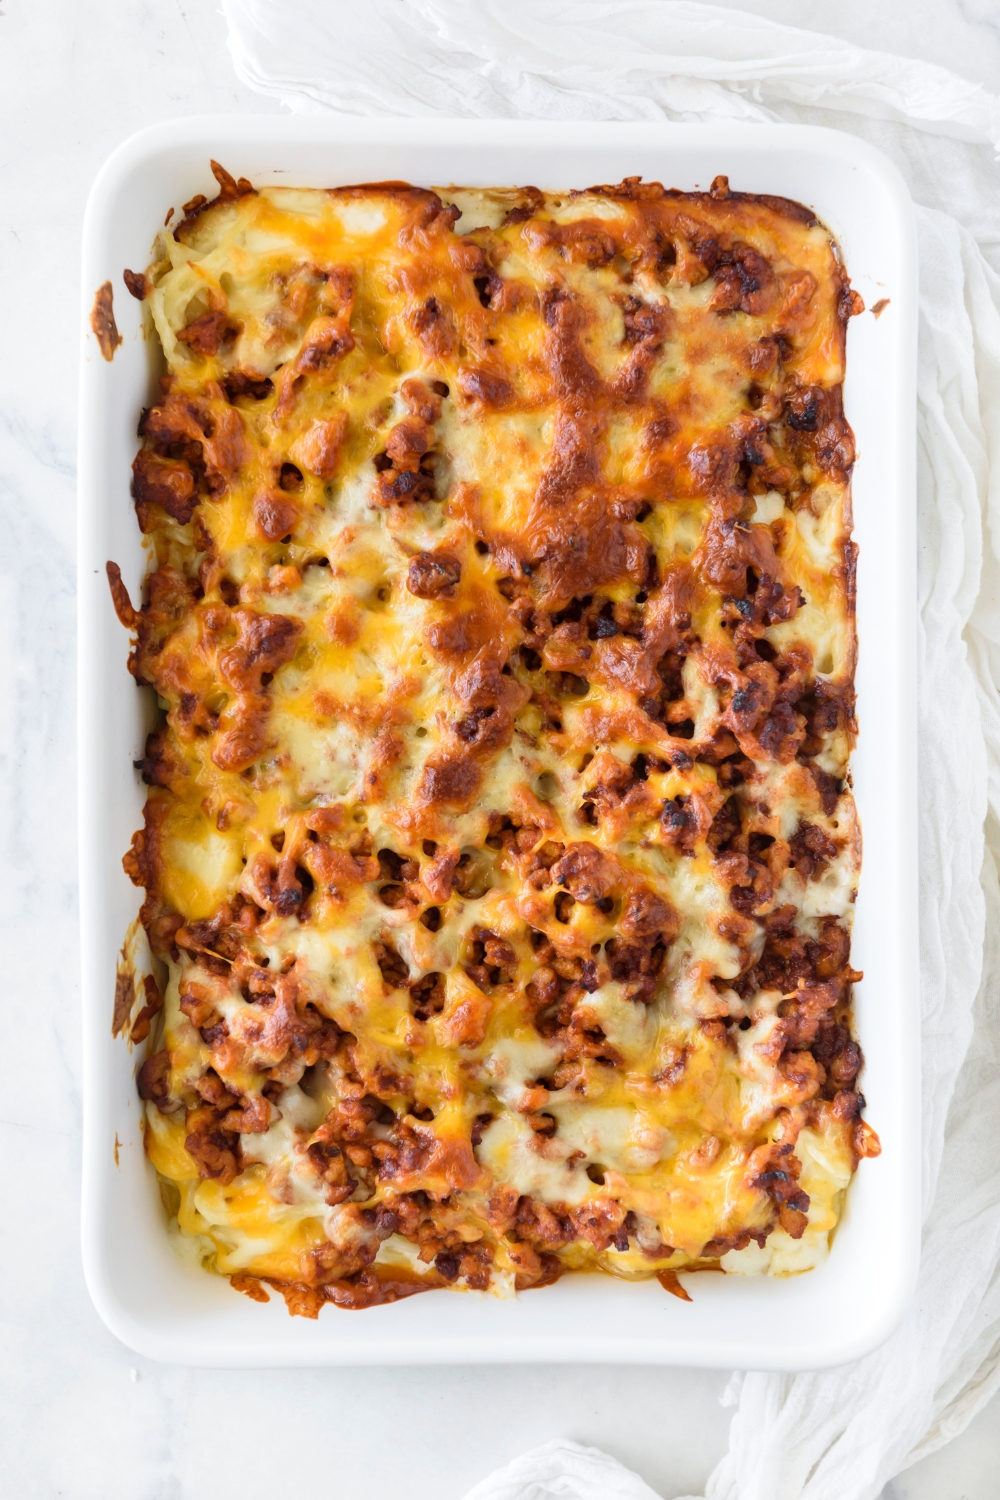 A baking dish filled with baked spaghetti covered in melted cheese with chunks of cooked ground meat.